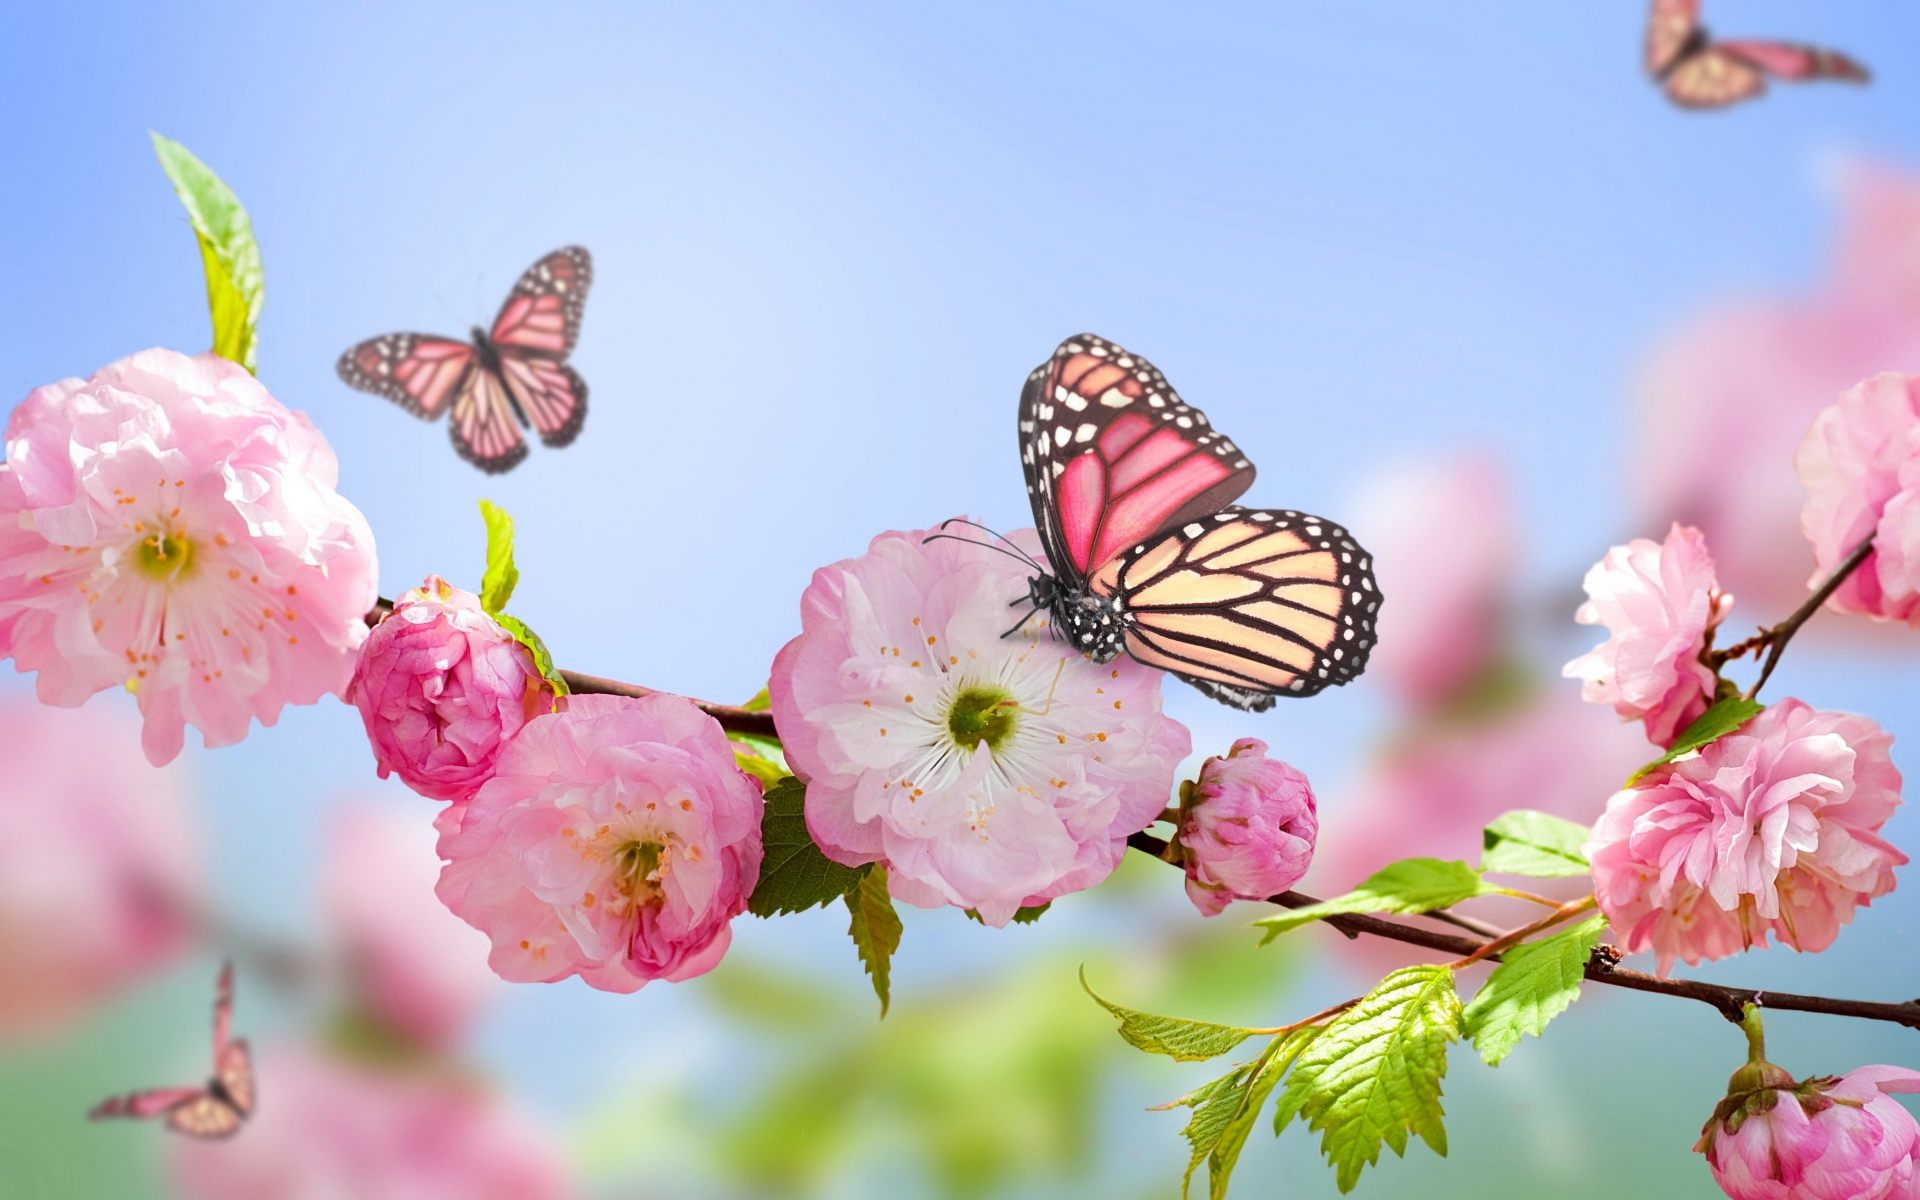 Flower With Butterfly Wallpaper HD Download High Quality